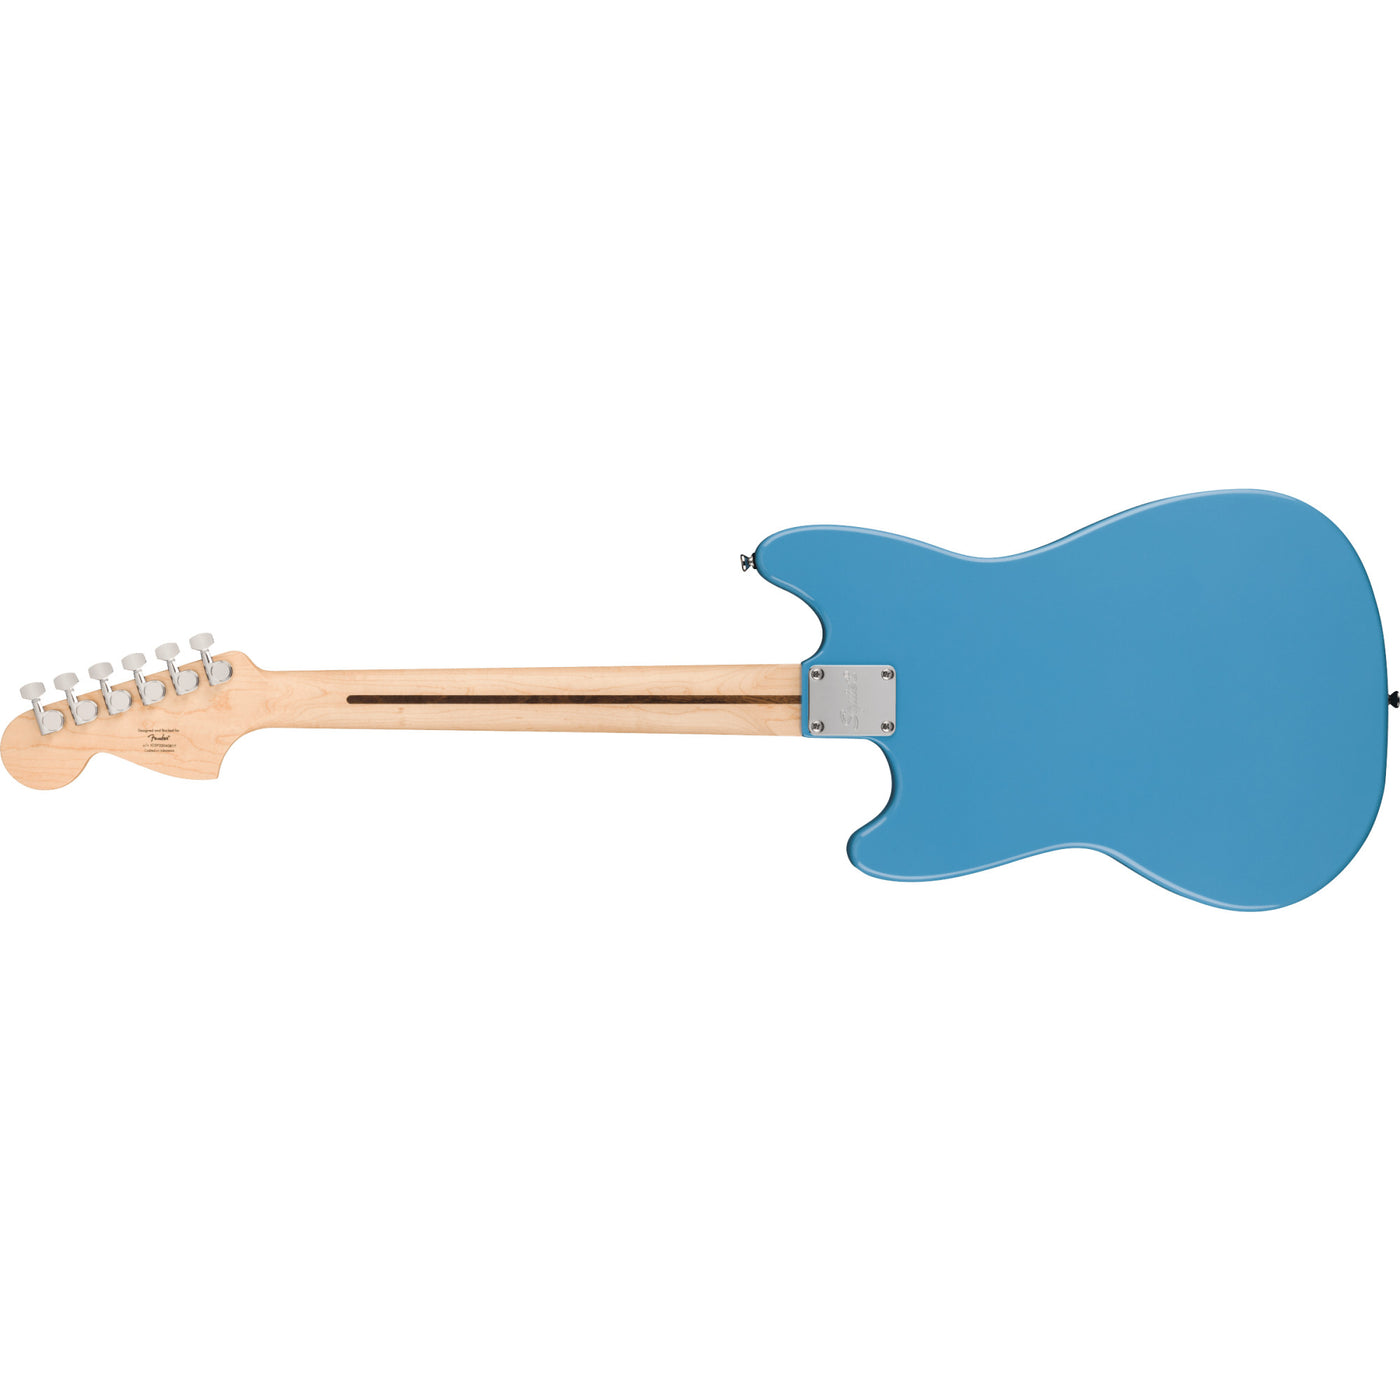 Squier Sonic Mustang HH Electric Guitar, California Blue (0373701526)